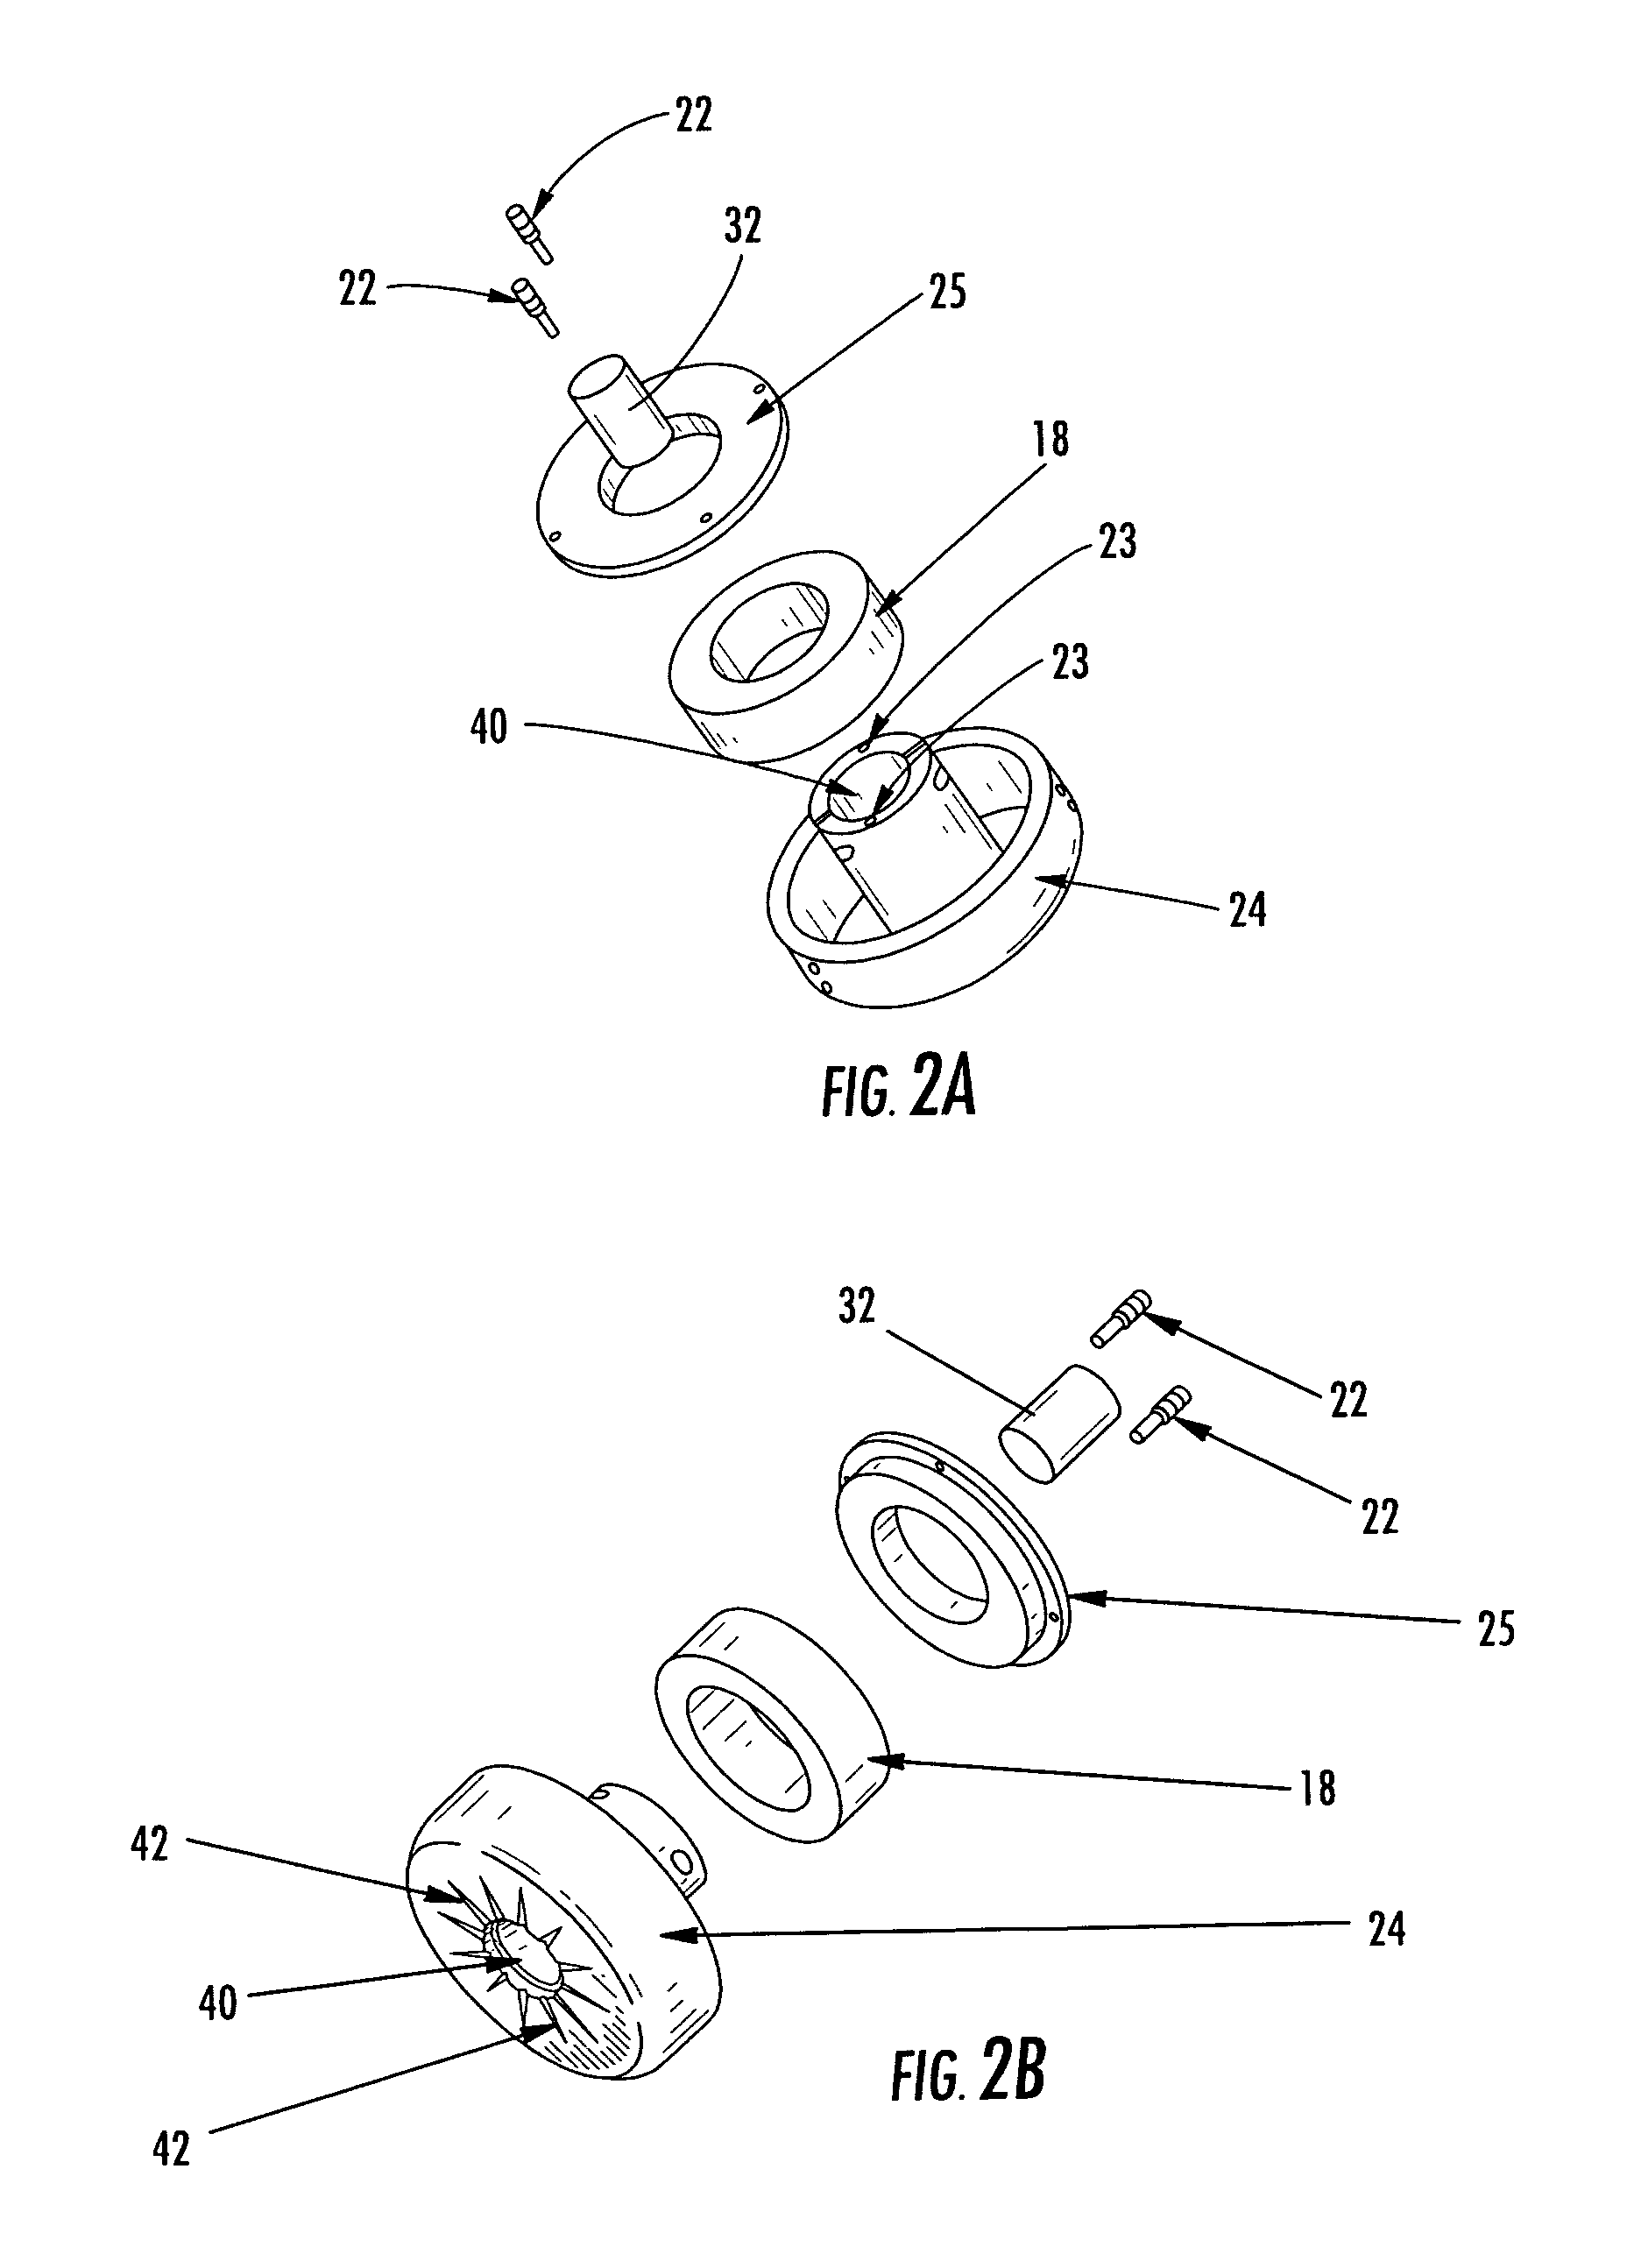 Magnetically attracted inspecting apparatus and method using a fluid bearing